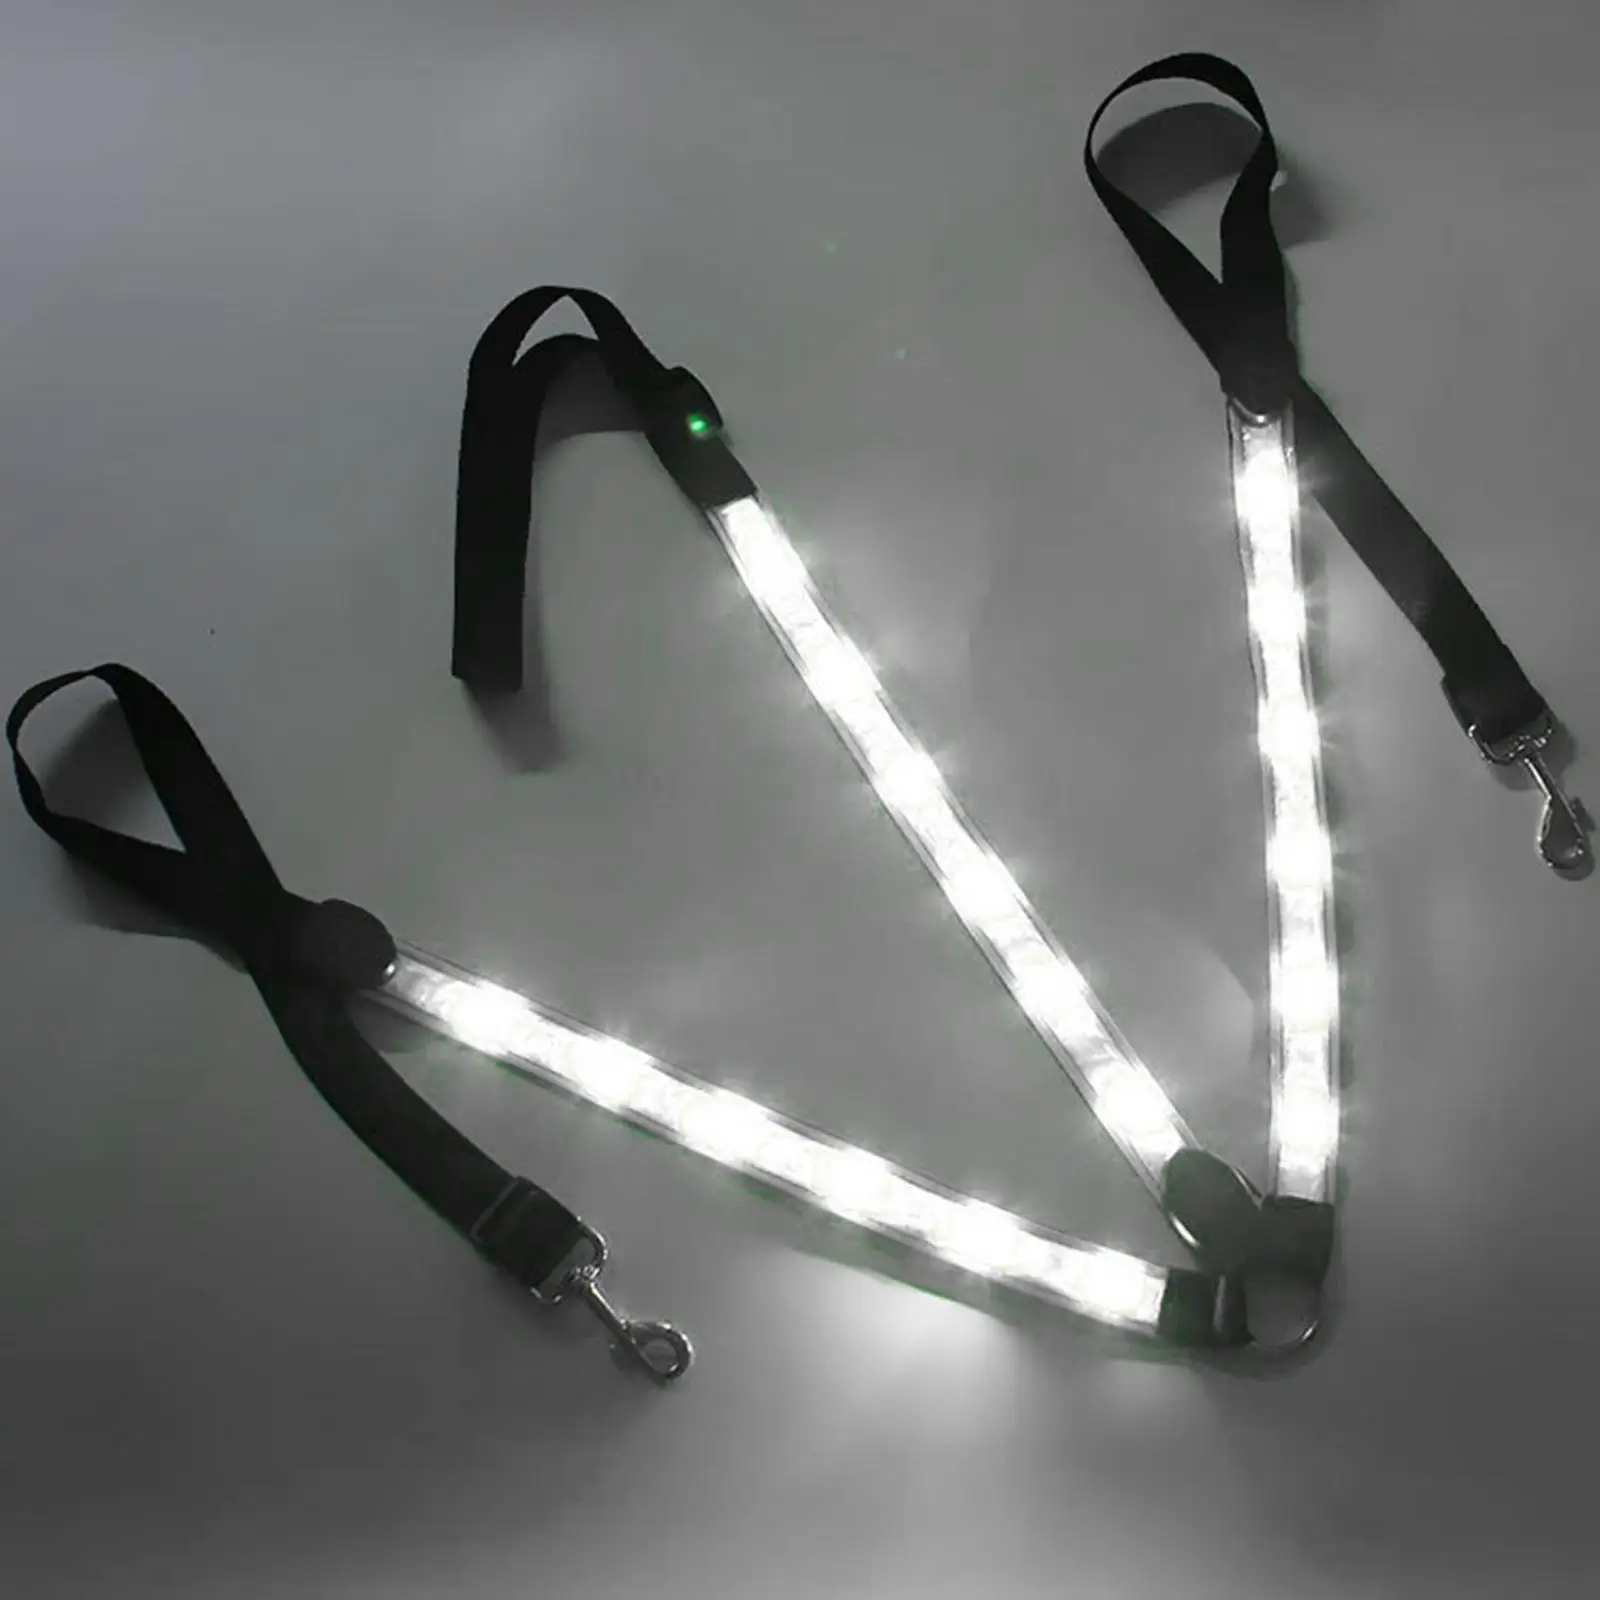 LED Horse Breastplate Collar Equestrian Safety Equipment Chest Strap Webbing